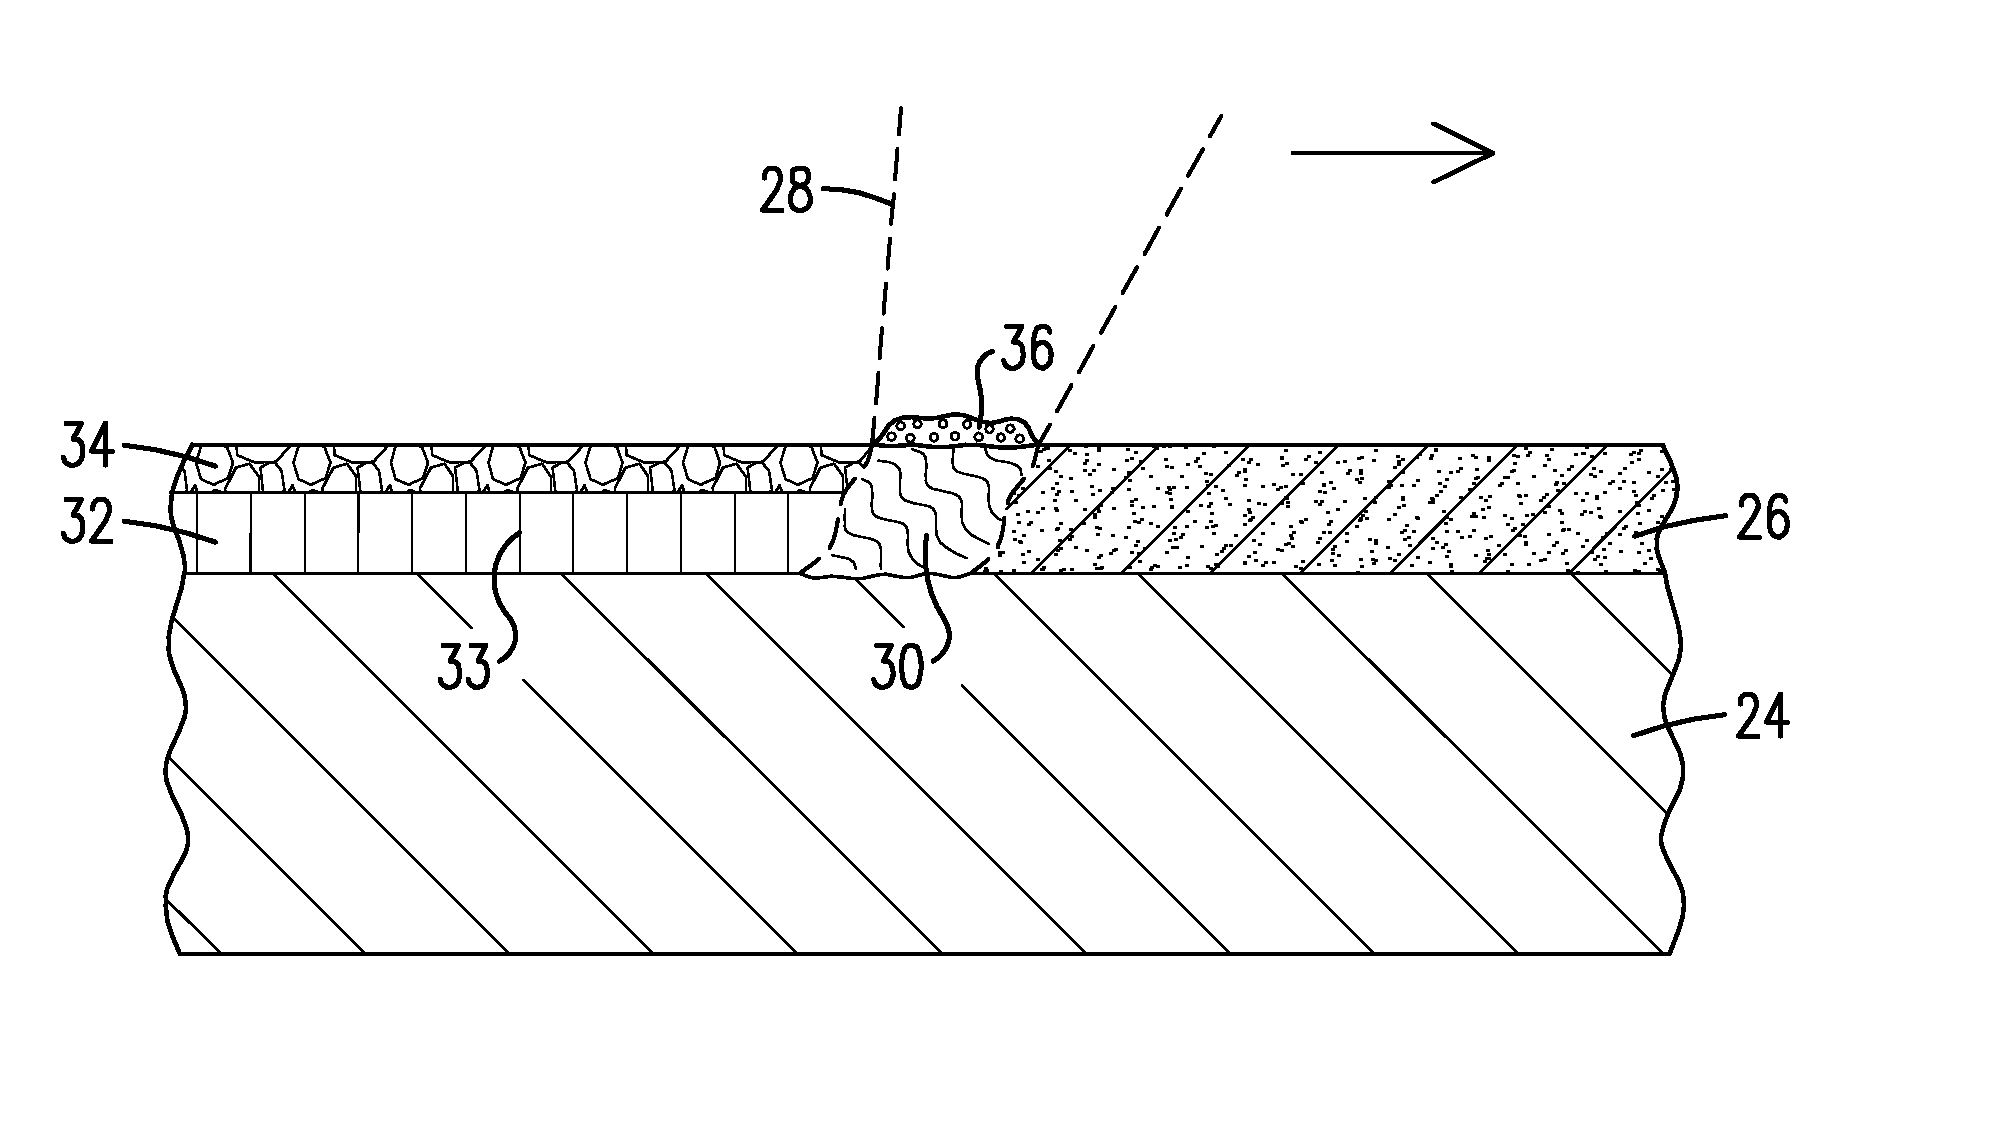 Composite materials and methods for laser manufacturing and repair of metals